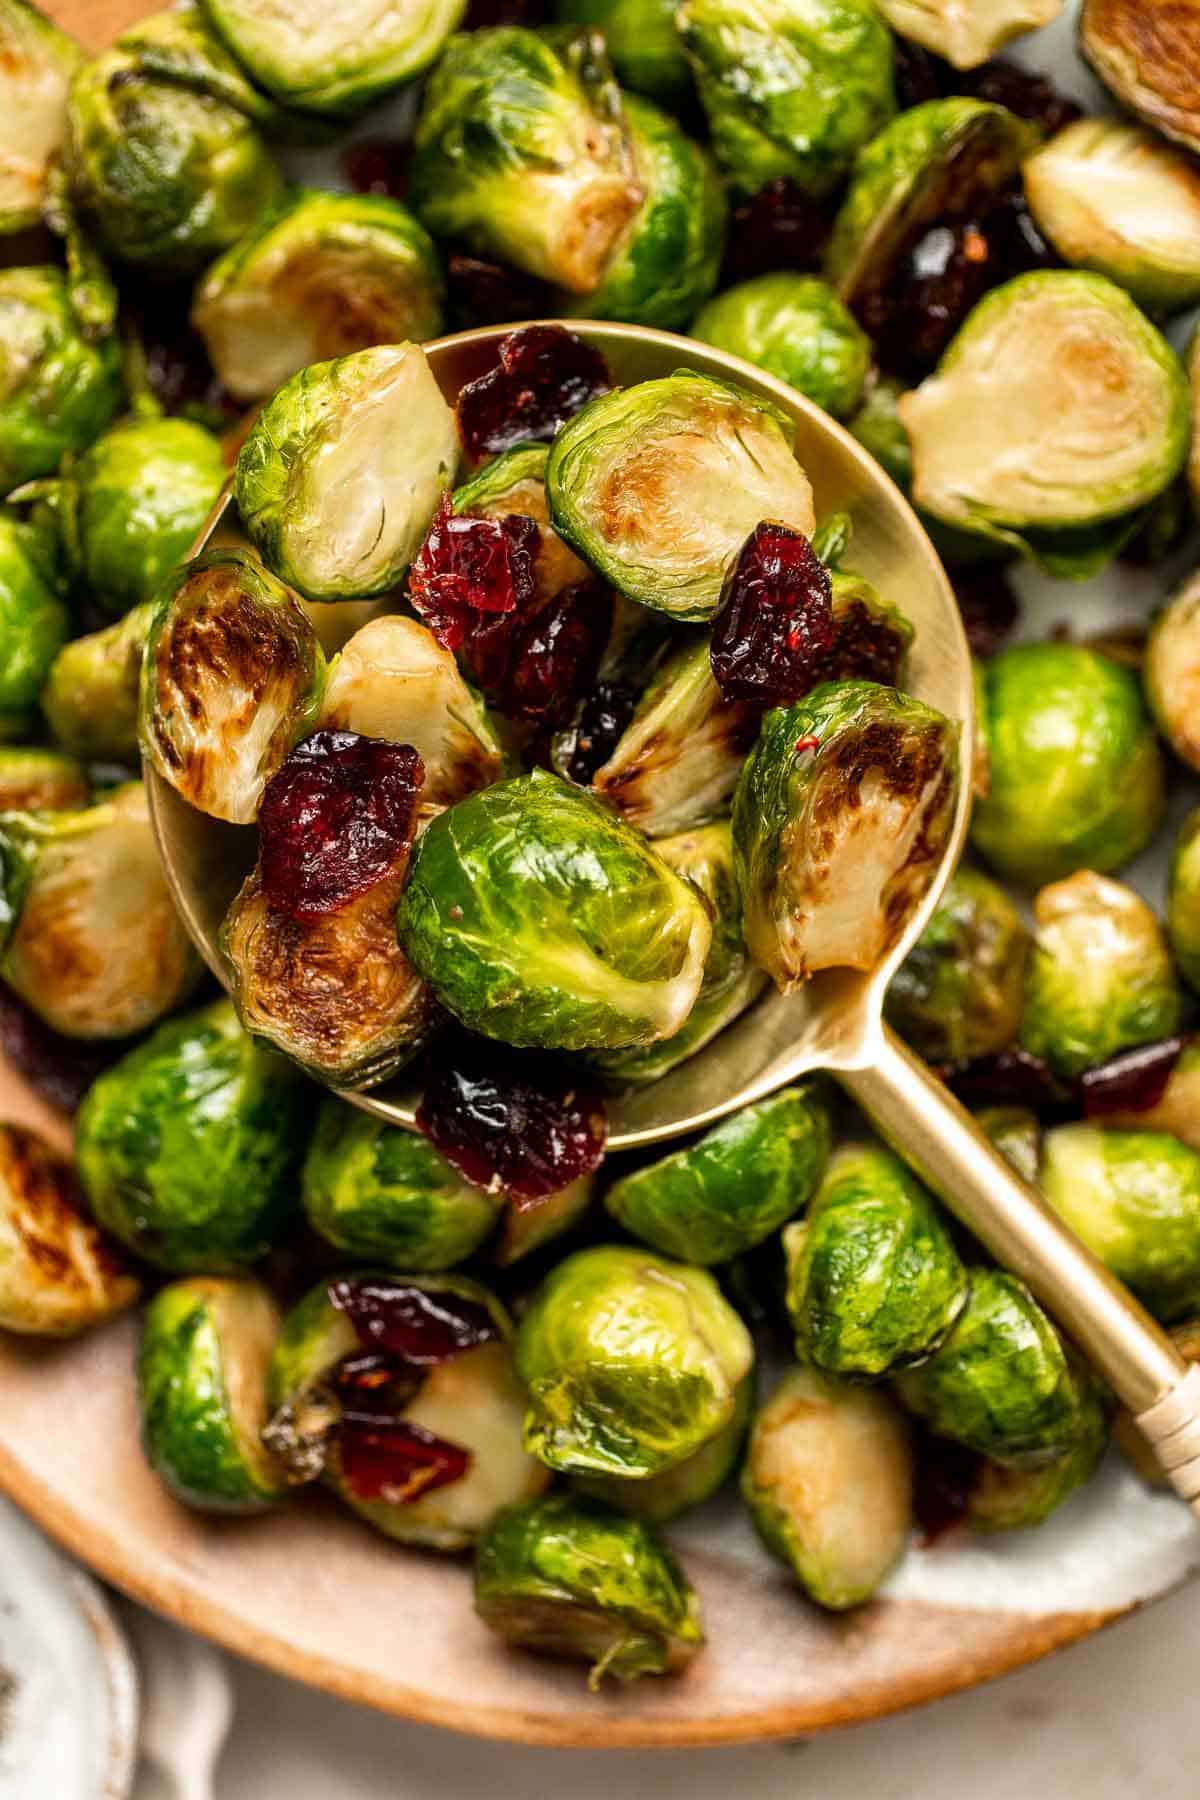 Brussels Sprouts with Cranberries are a delicious, festive side dish that is easy to make with earthy Brussels sprouts and tart cranberries. | aheadofthyme.com